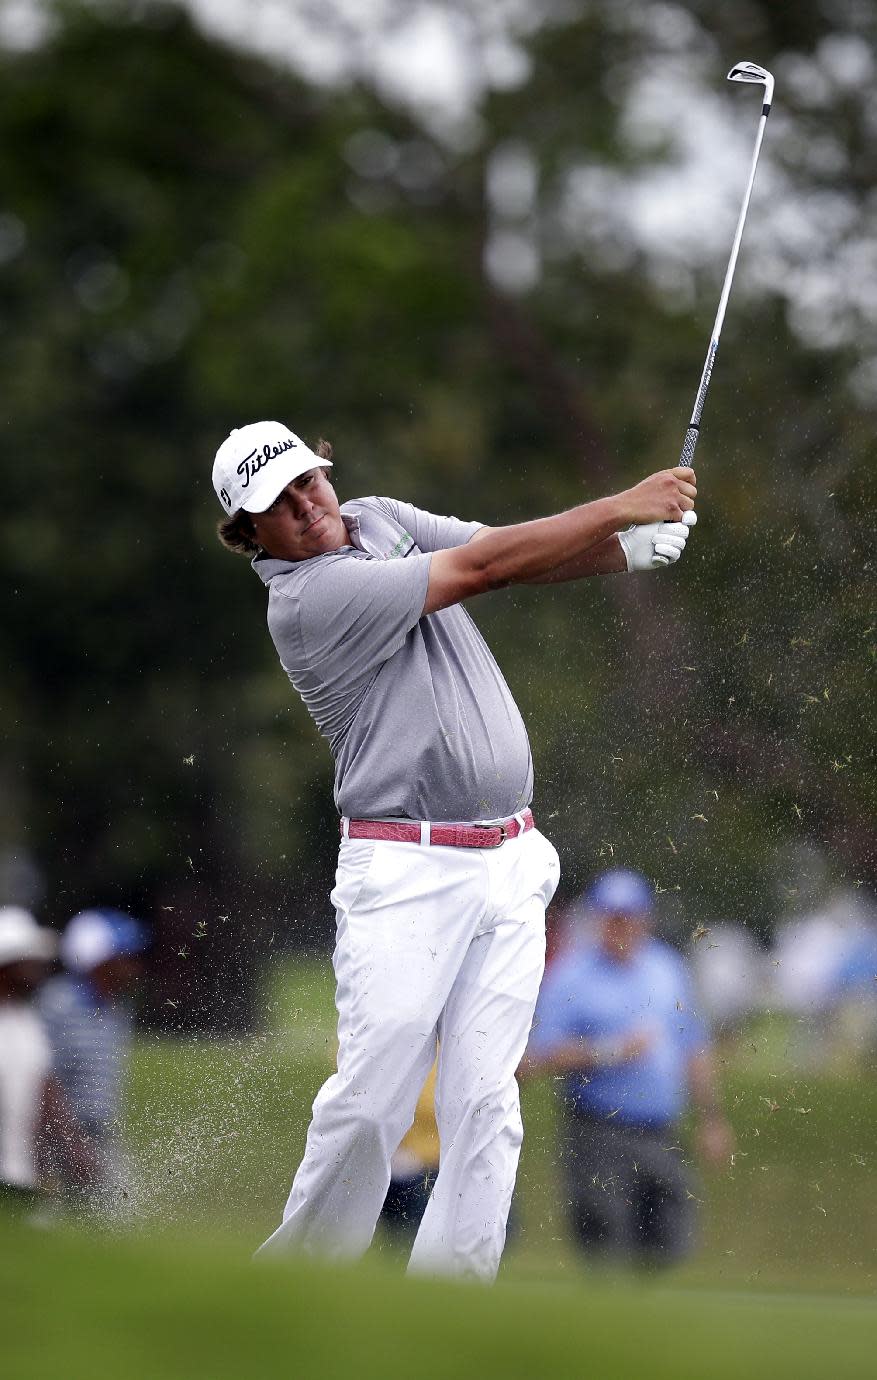 Jason Dufner hits from the fairway on the 17th hole during the first round of the Cadillac Championship golf tournament Thursday, March 6, 2014, in Doral, Fla. (AP Photo/Wilfredo Lee)